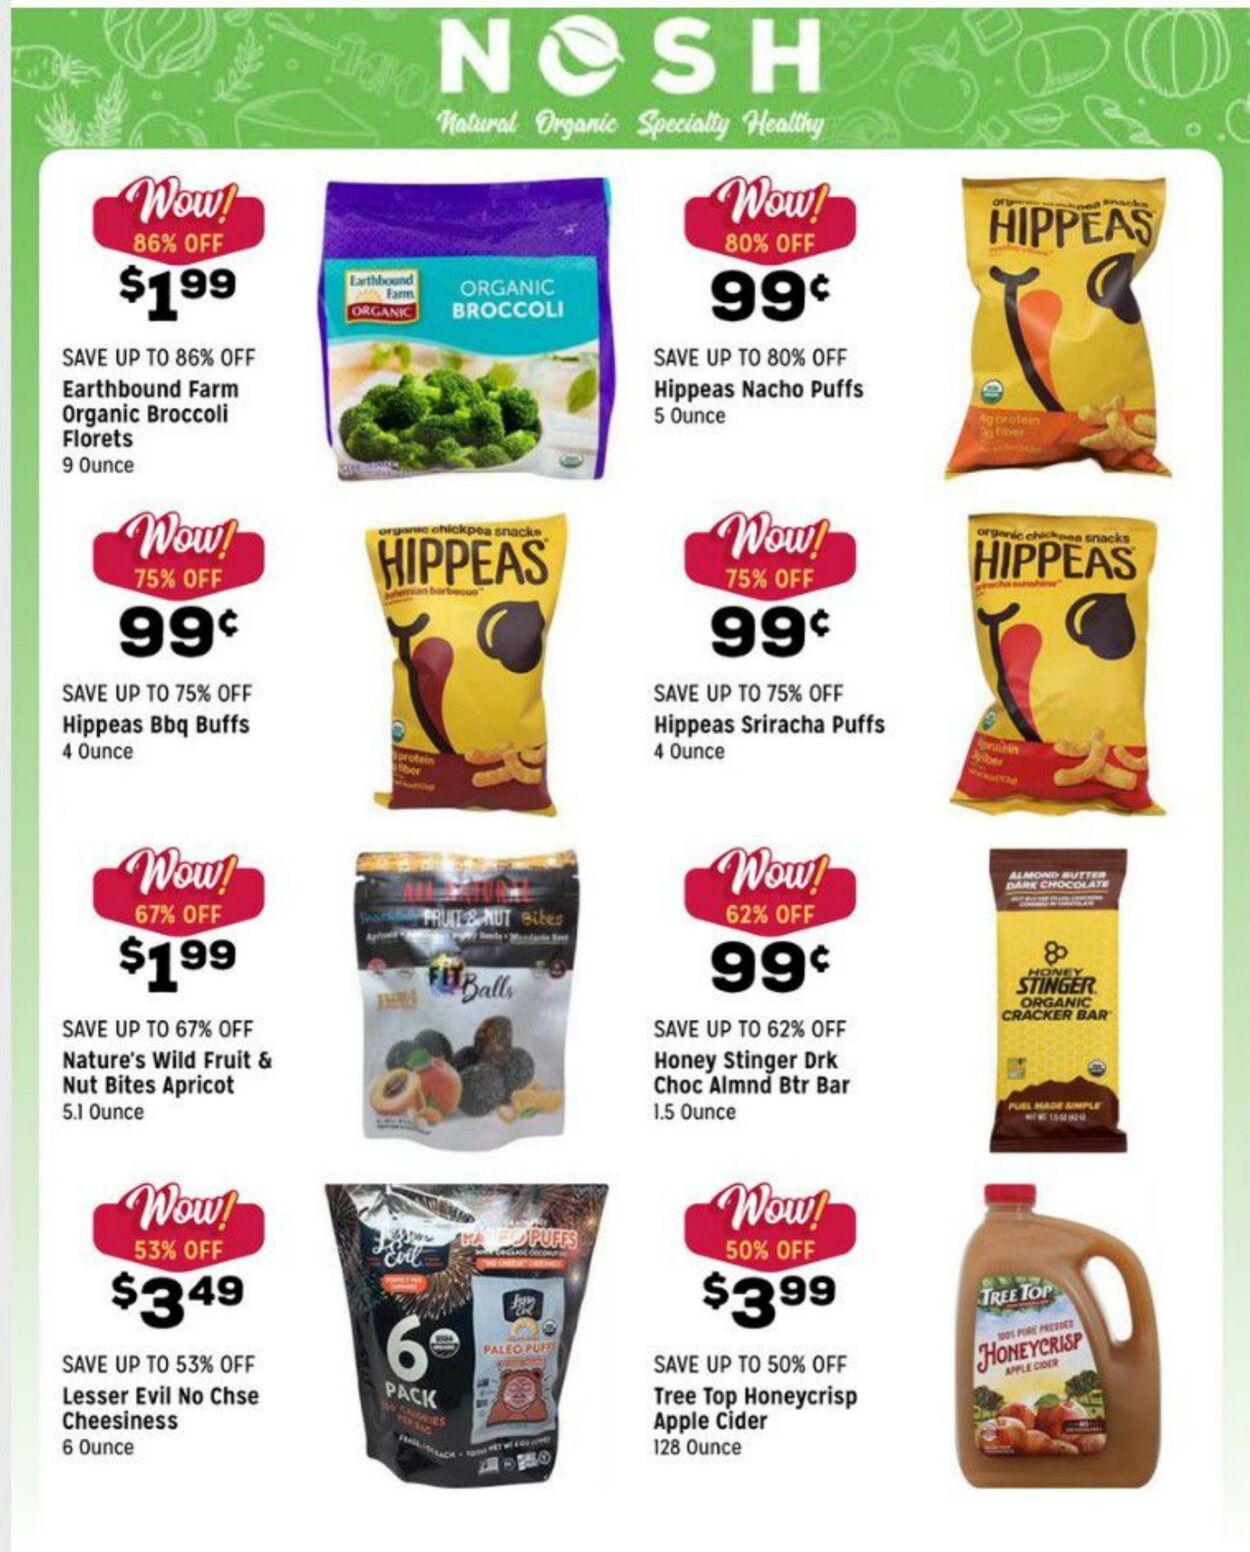 Weekly ad Grocery Outlet 05/11/2022 - 05/17/2022